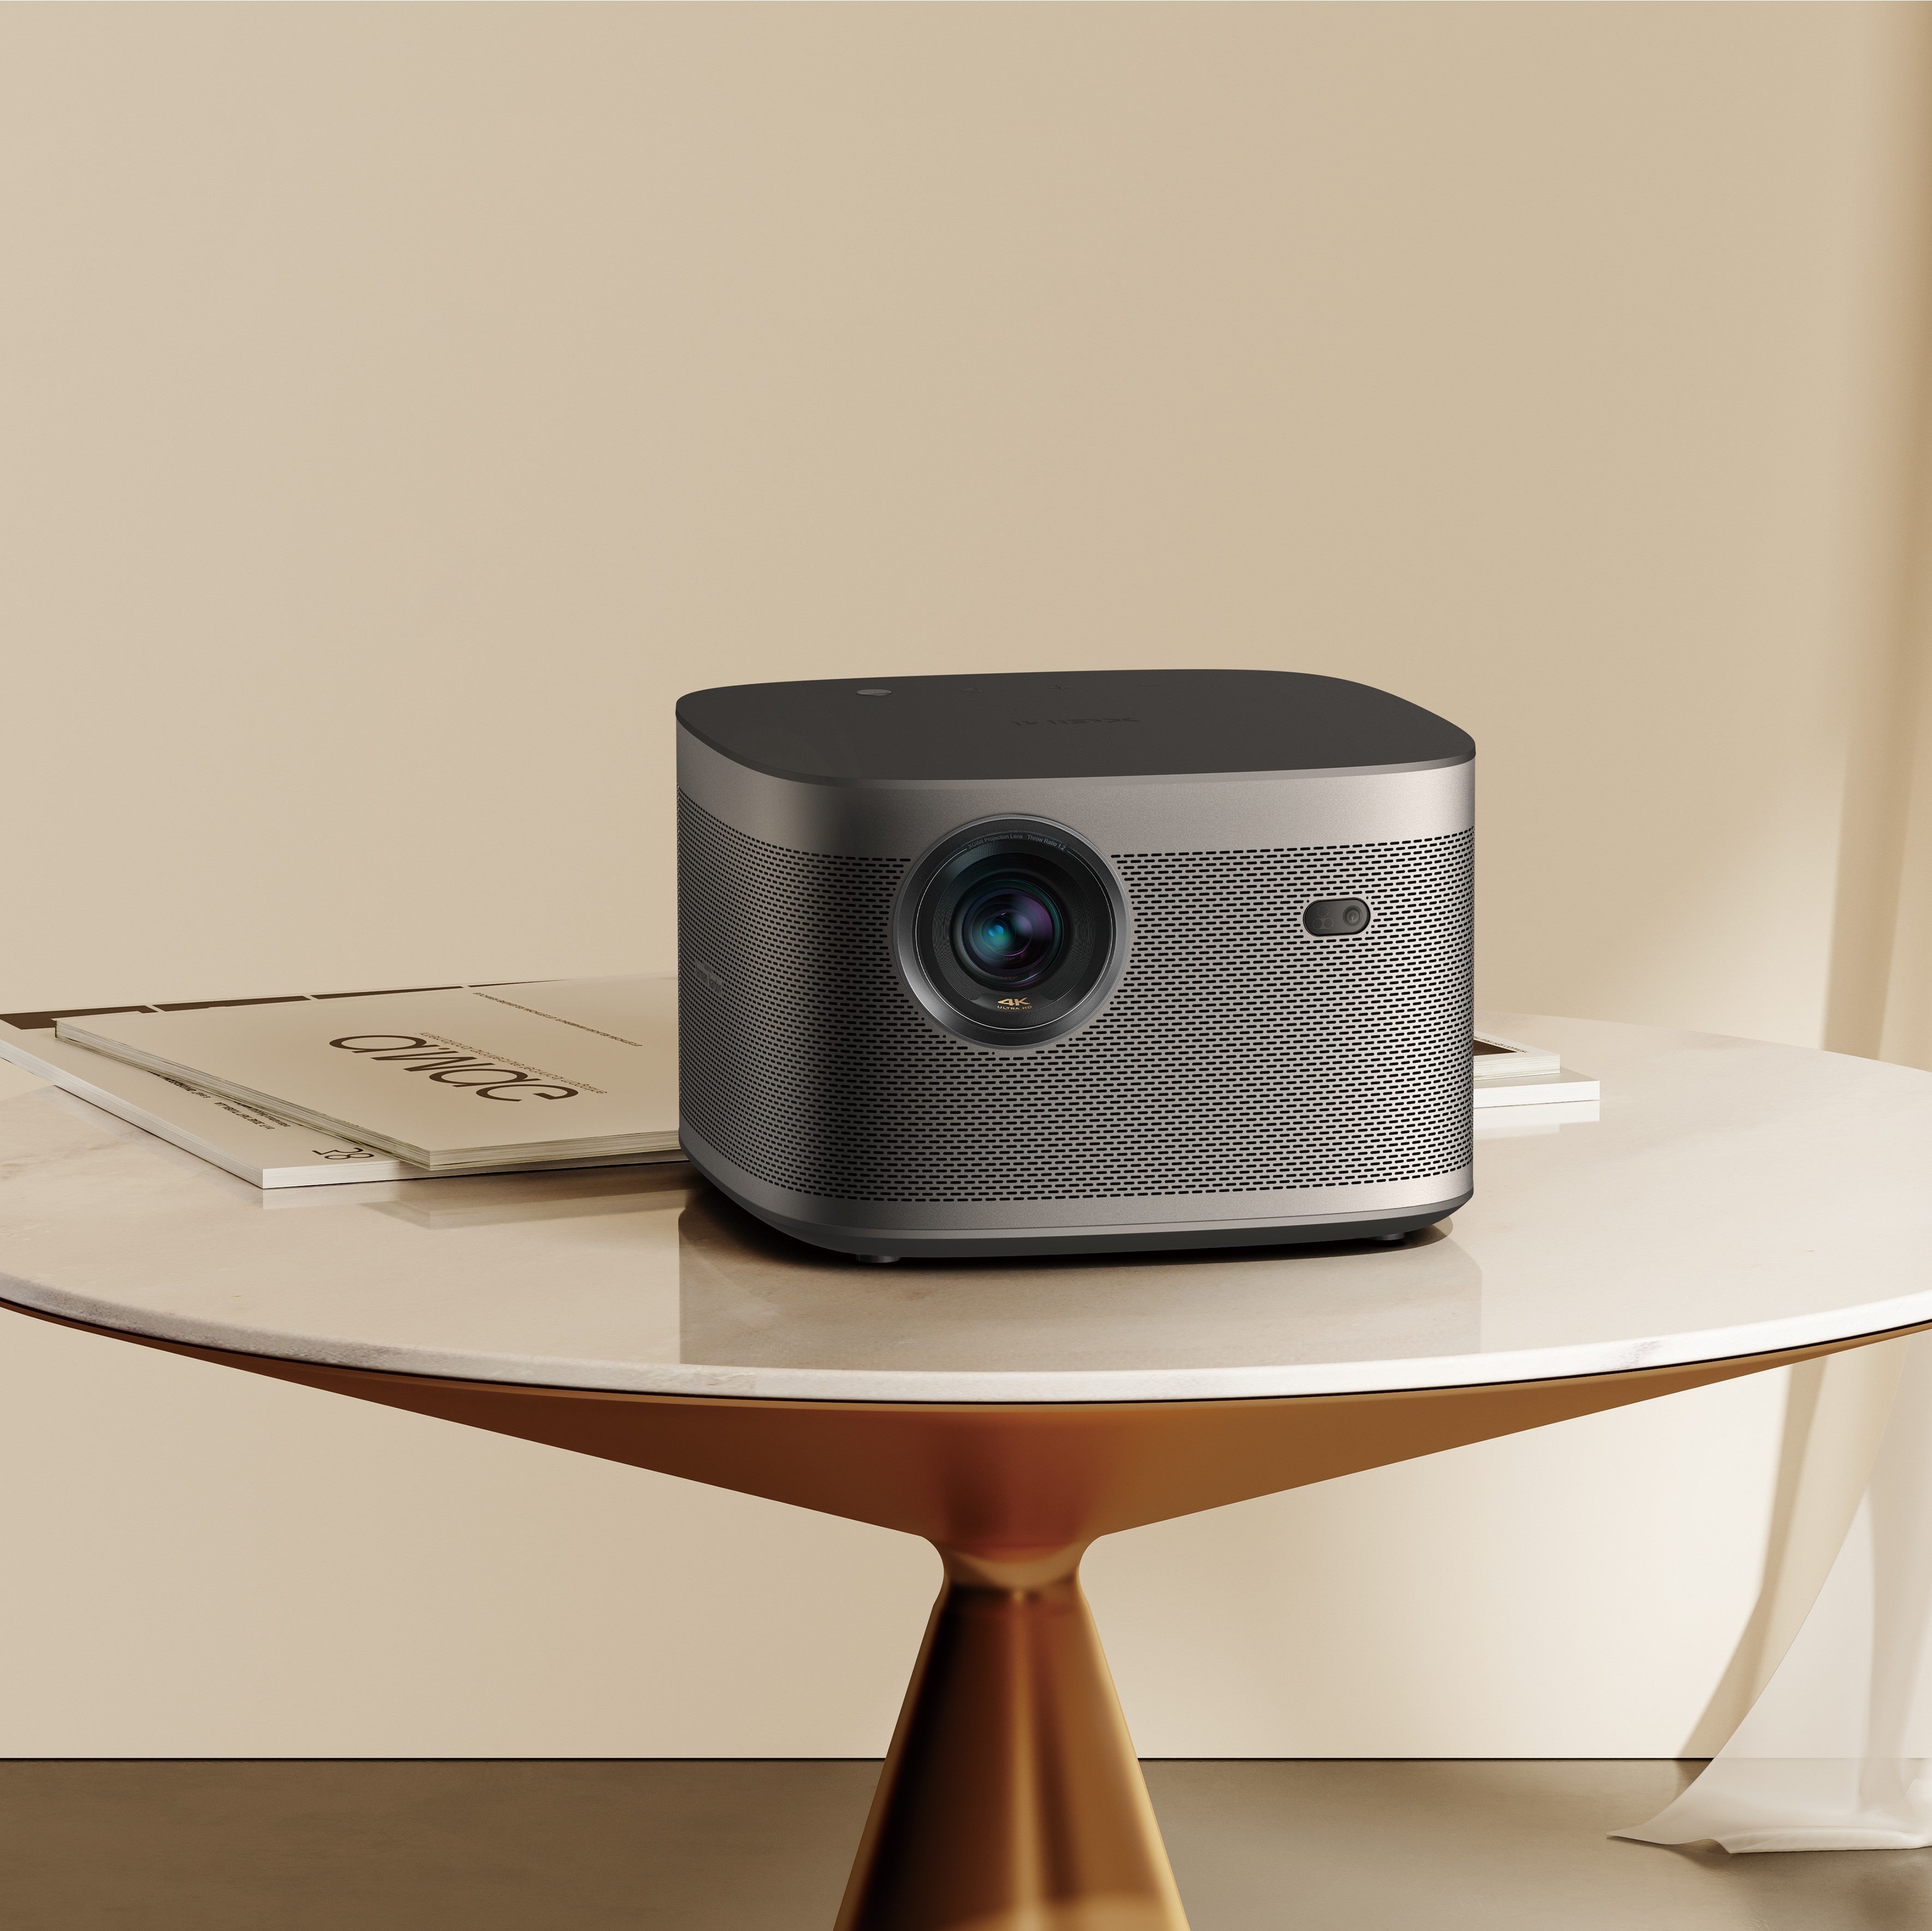 Buying Guide For The Best Home Theater Projector For Under $2,000  